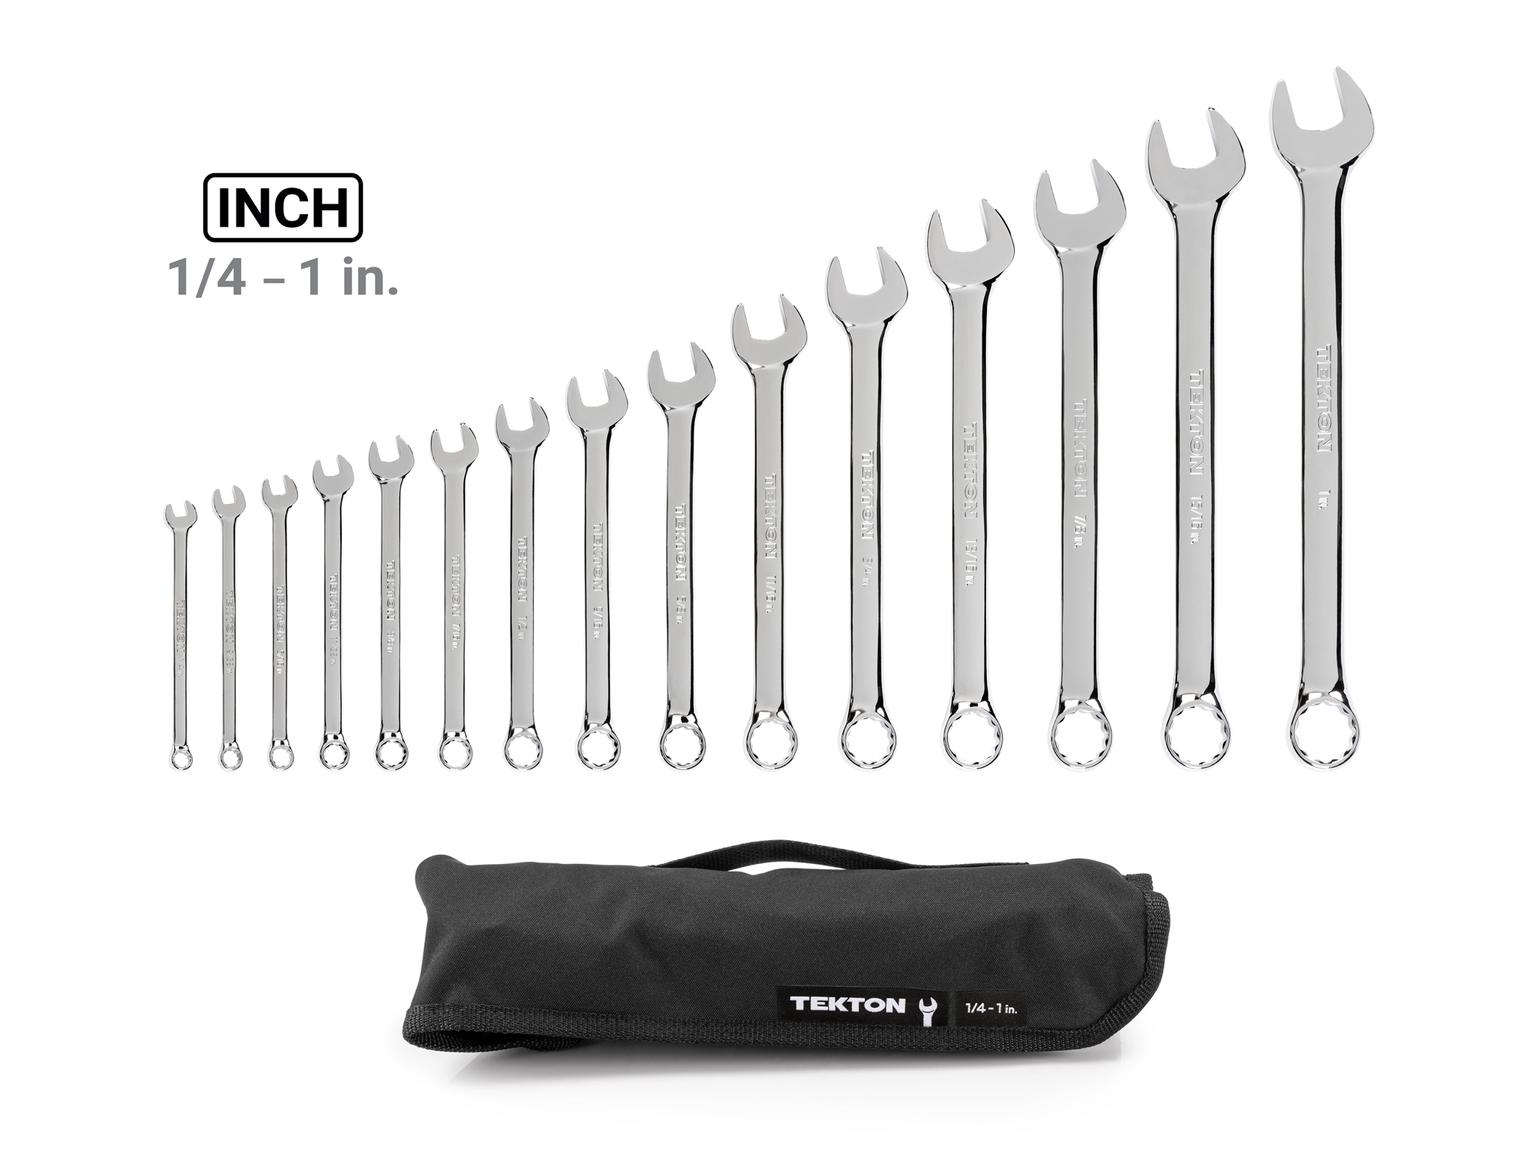 TEKTON WCB94102-T Combination Wrench Set with Pouch, 15-Piece (1/4 - 1 in.)